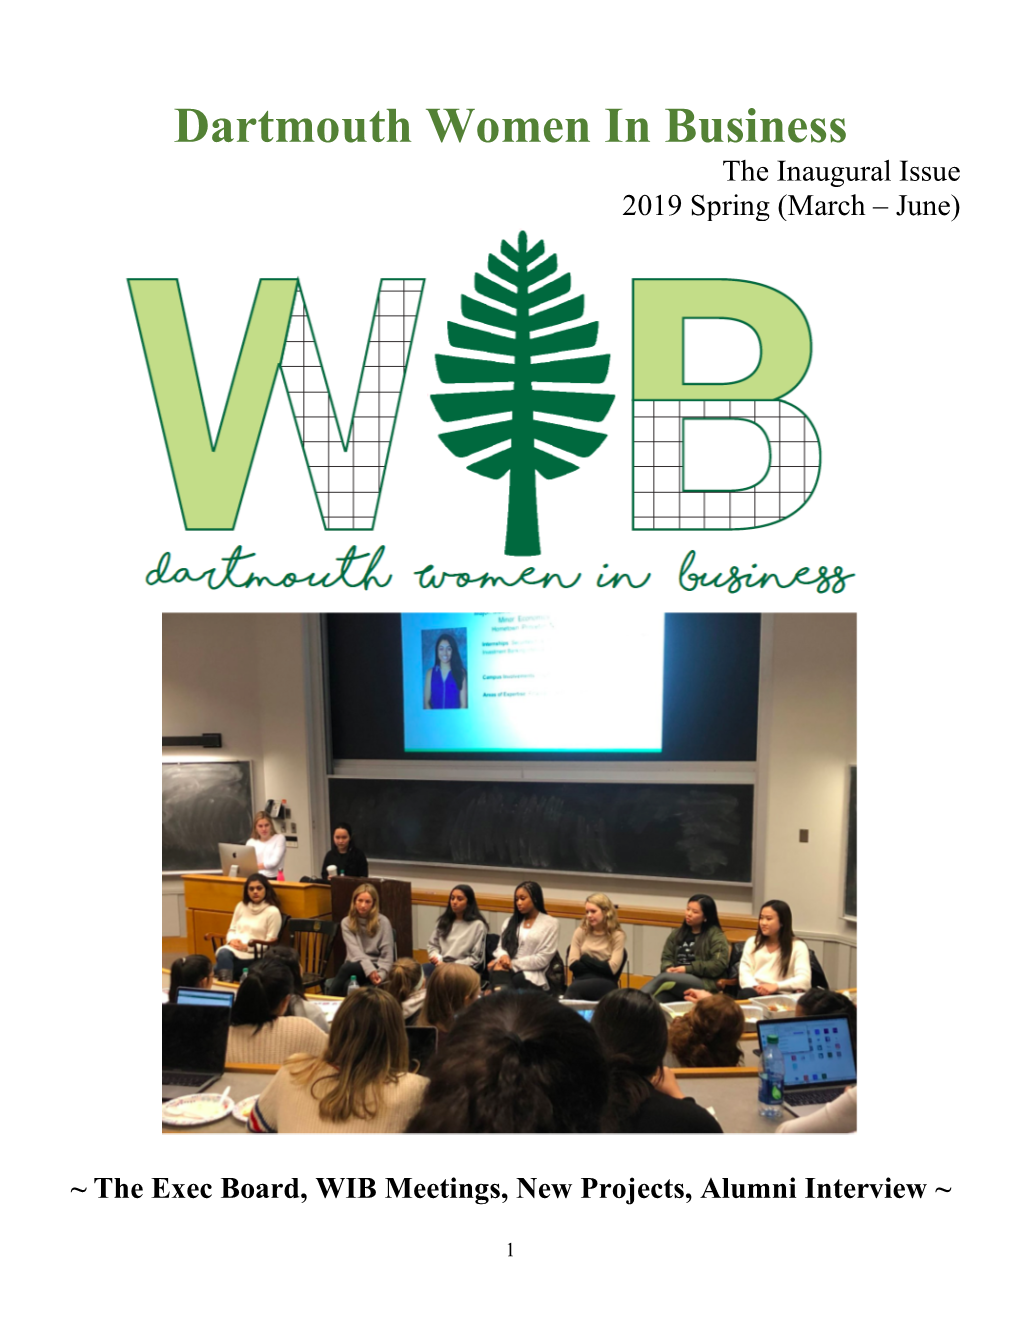 Dartmouth Women in Business the Inaugural Issue 2019 Spring (March – June)